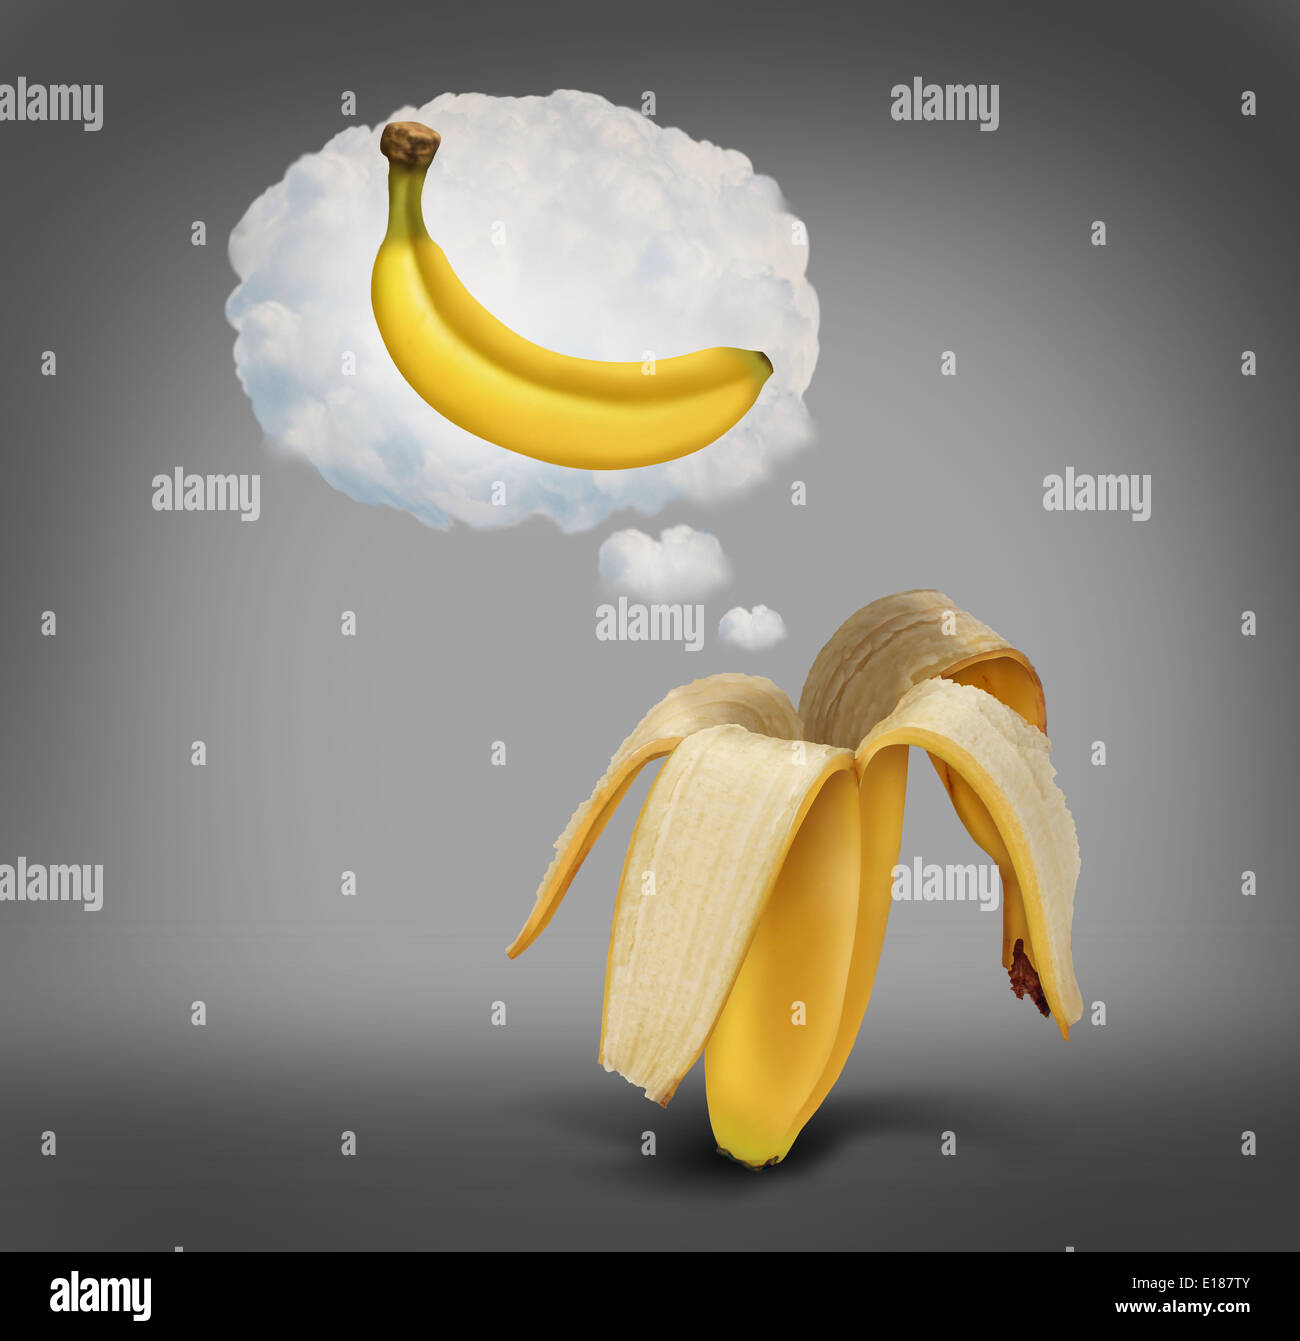 Better days concept as an empty banana skin dreaming of a good future or past success as a full single fruit as a metaphor for optimism and positive outllook on business. Stock Photo